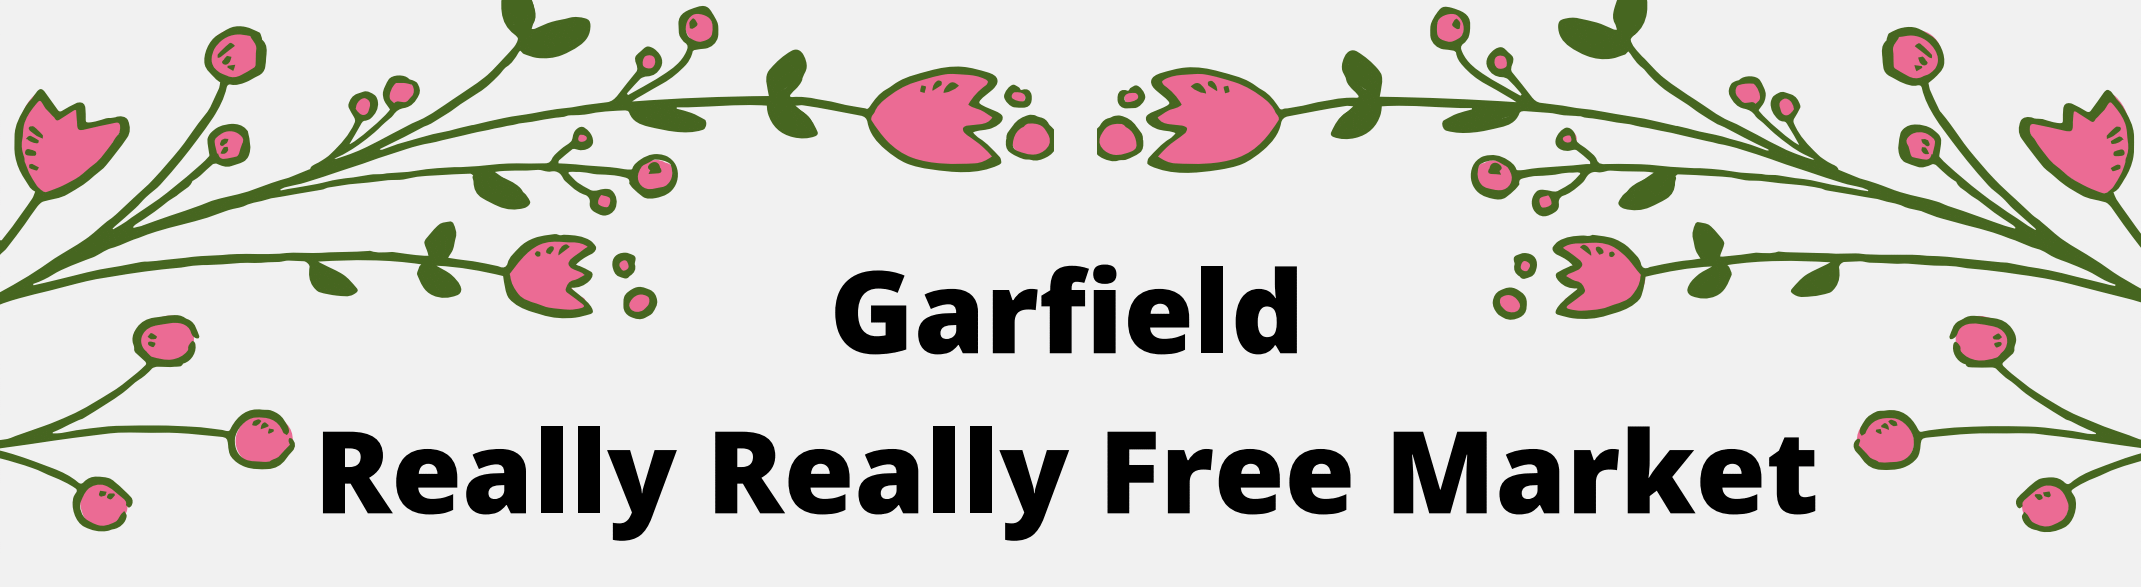 Garfield Really Really Free Market – March 26th